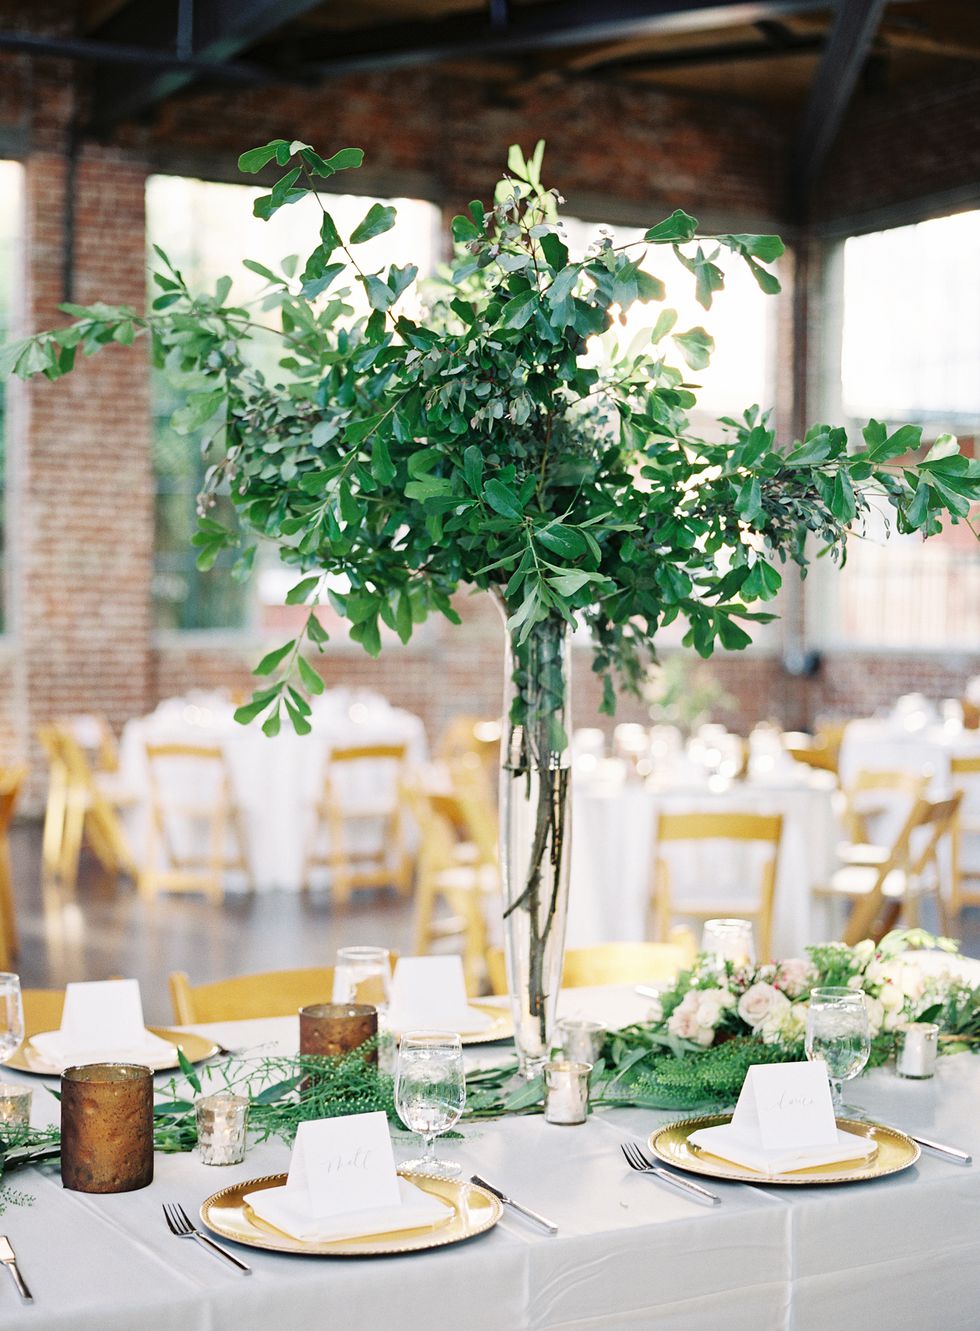 Greenery centerpieces which are branches stuff in a vase